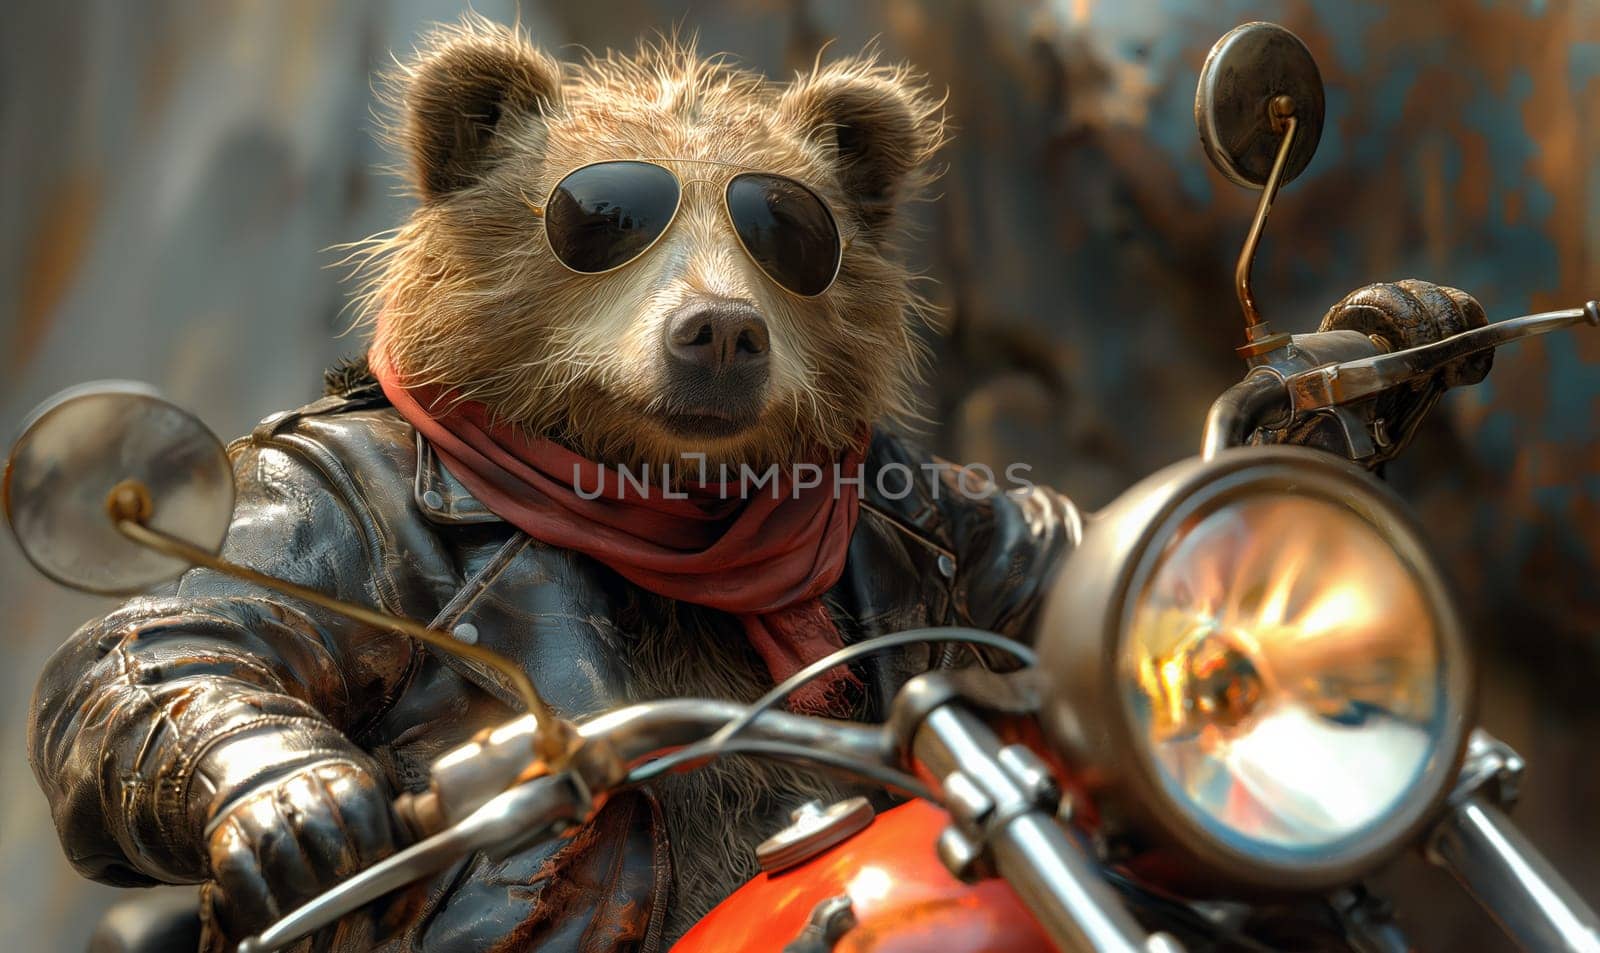 Children's illustration, a bear in sunglasses on a motorcycle. Selective soft focus.